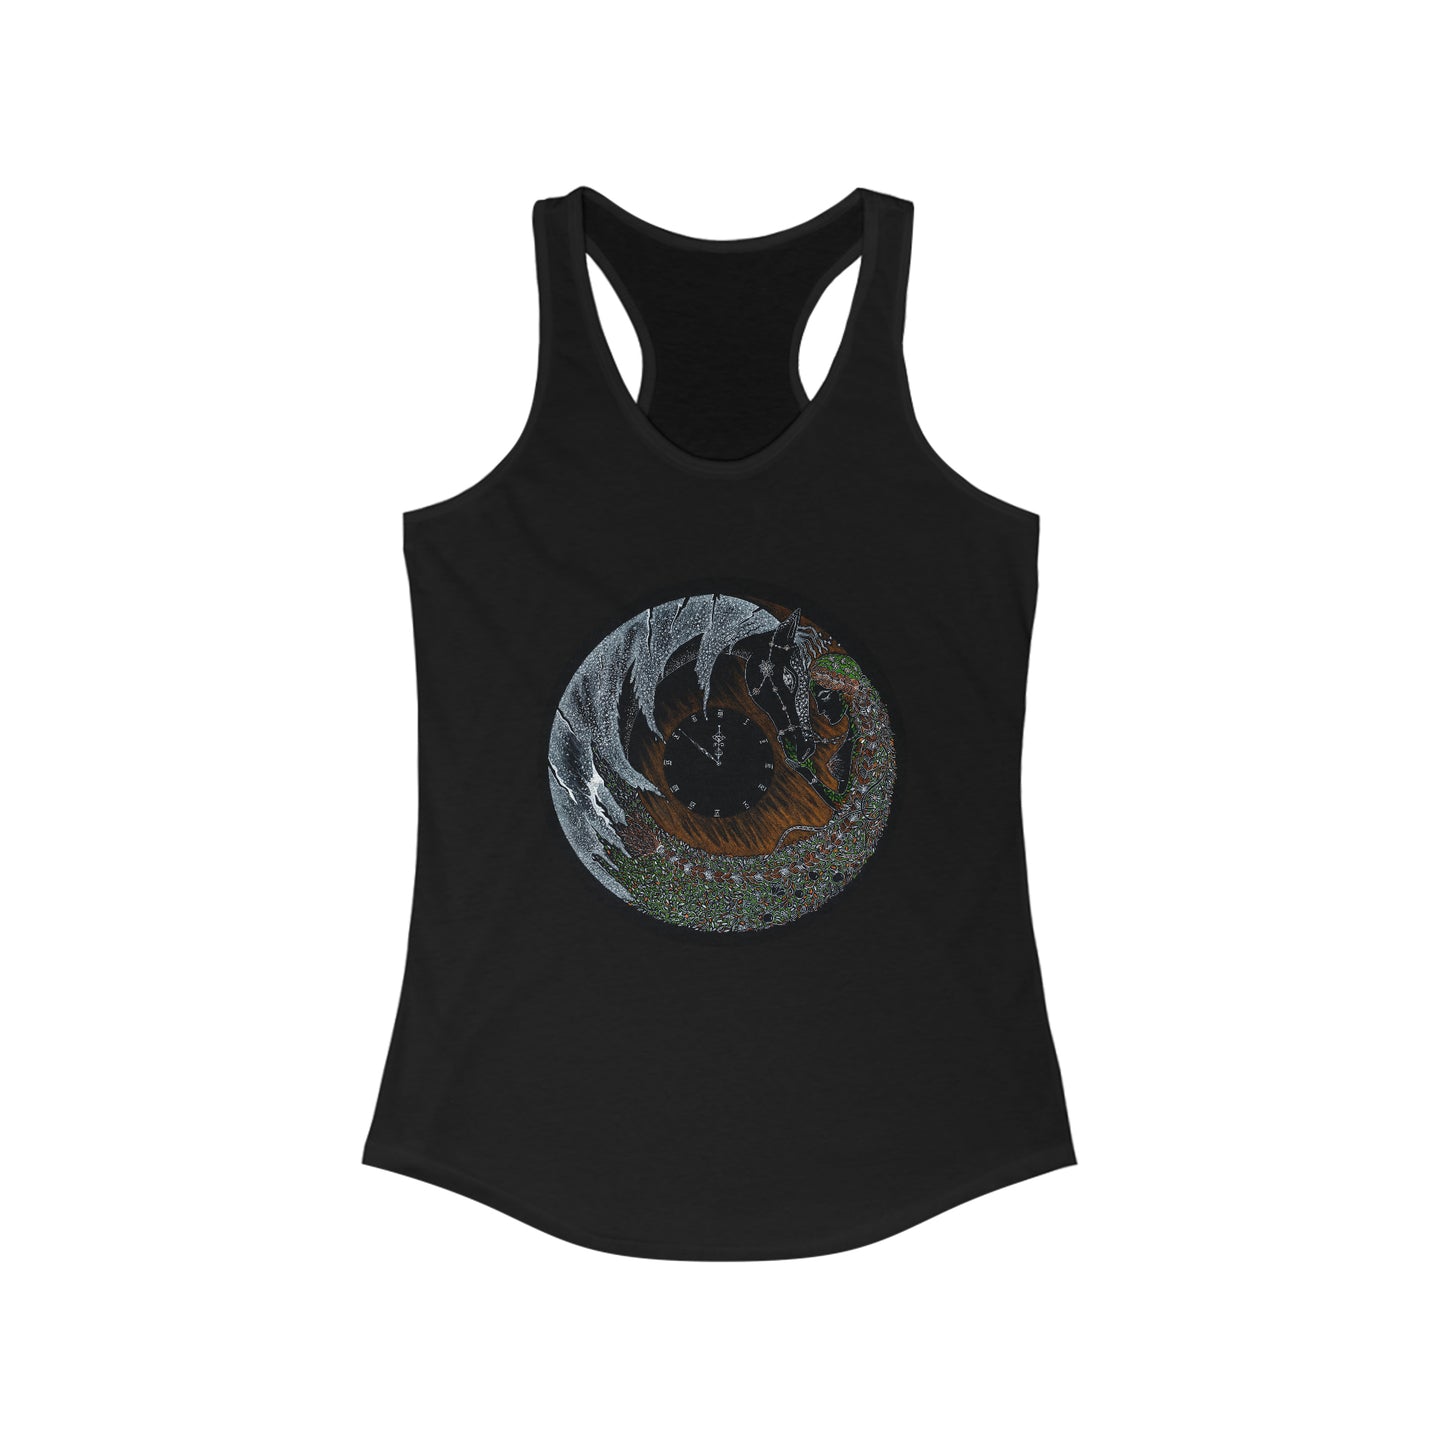 Chinese Zodiac Sign Tank Top (Horse)